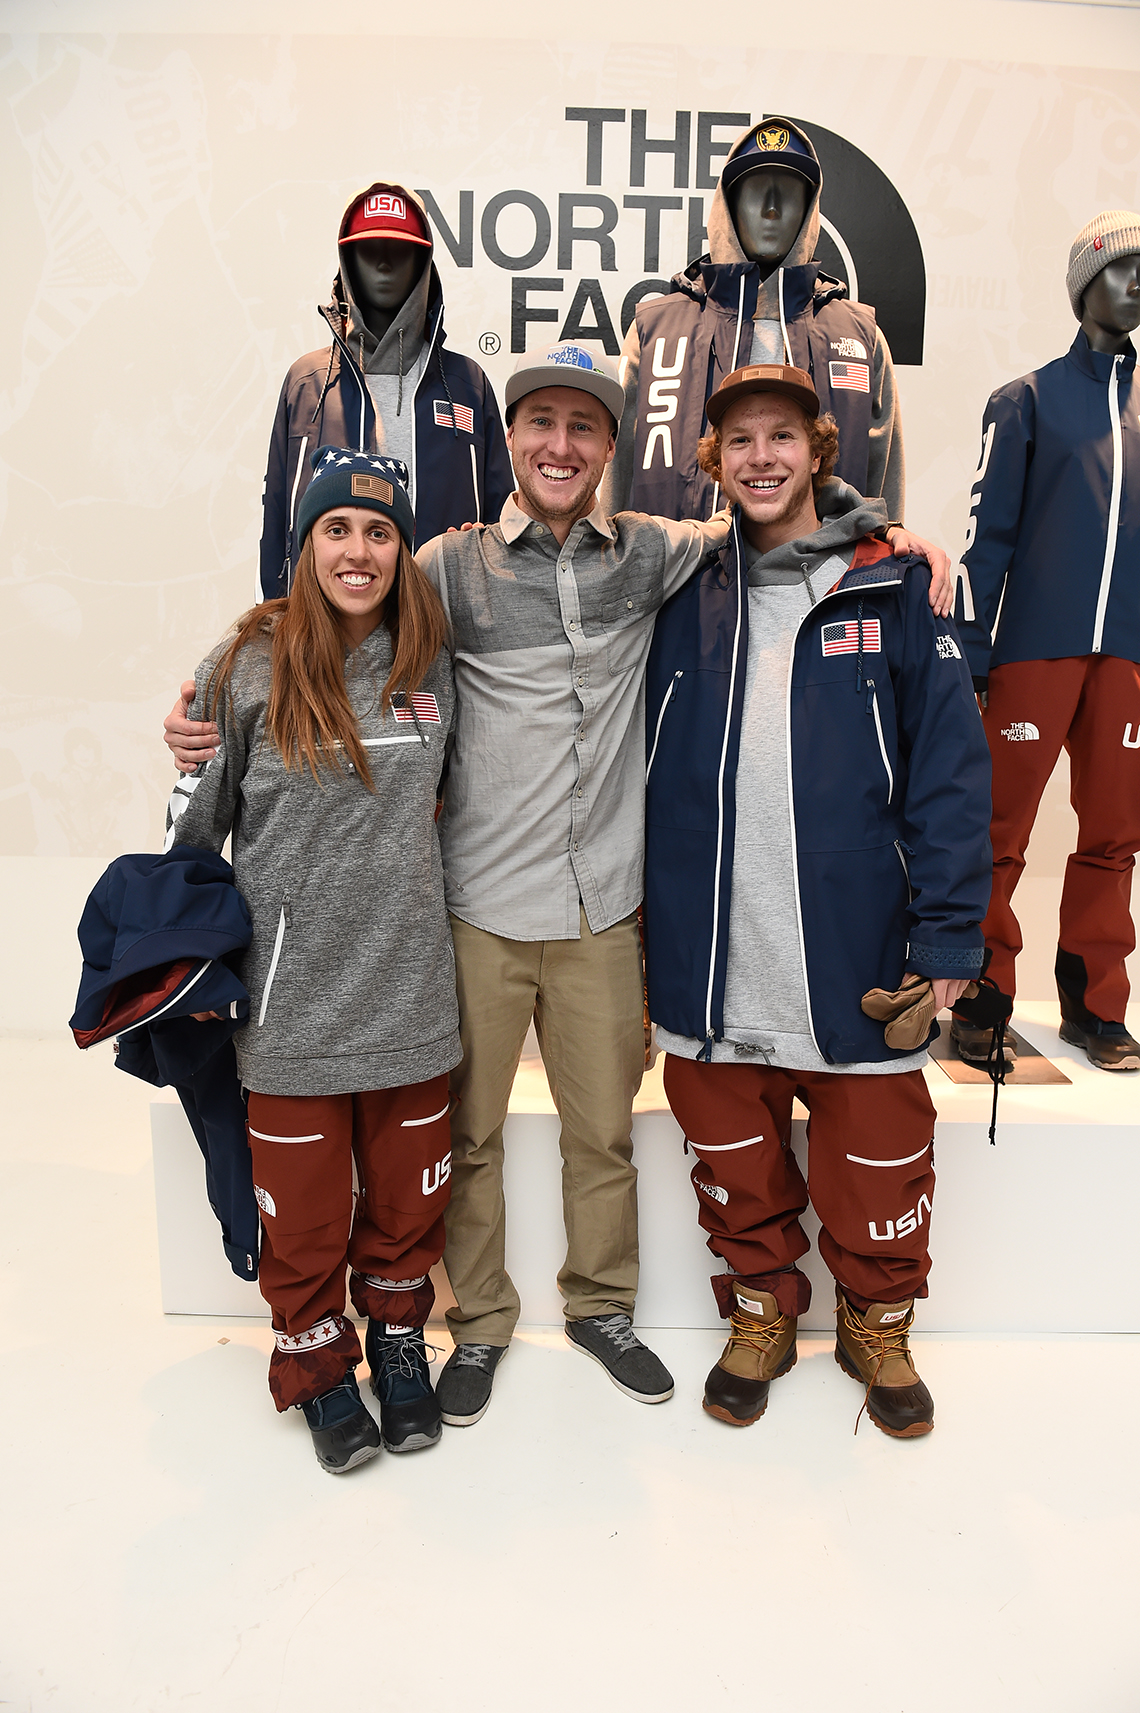 Long-time TNF athlete Tom Wallisch, center, is all smiles posing with Bowman, left, and Blunck, right.